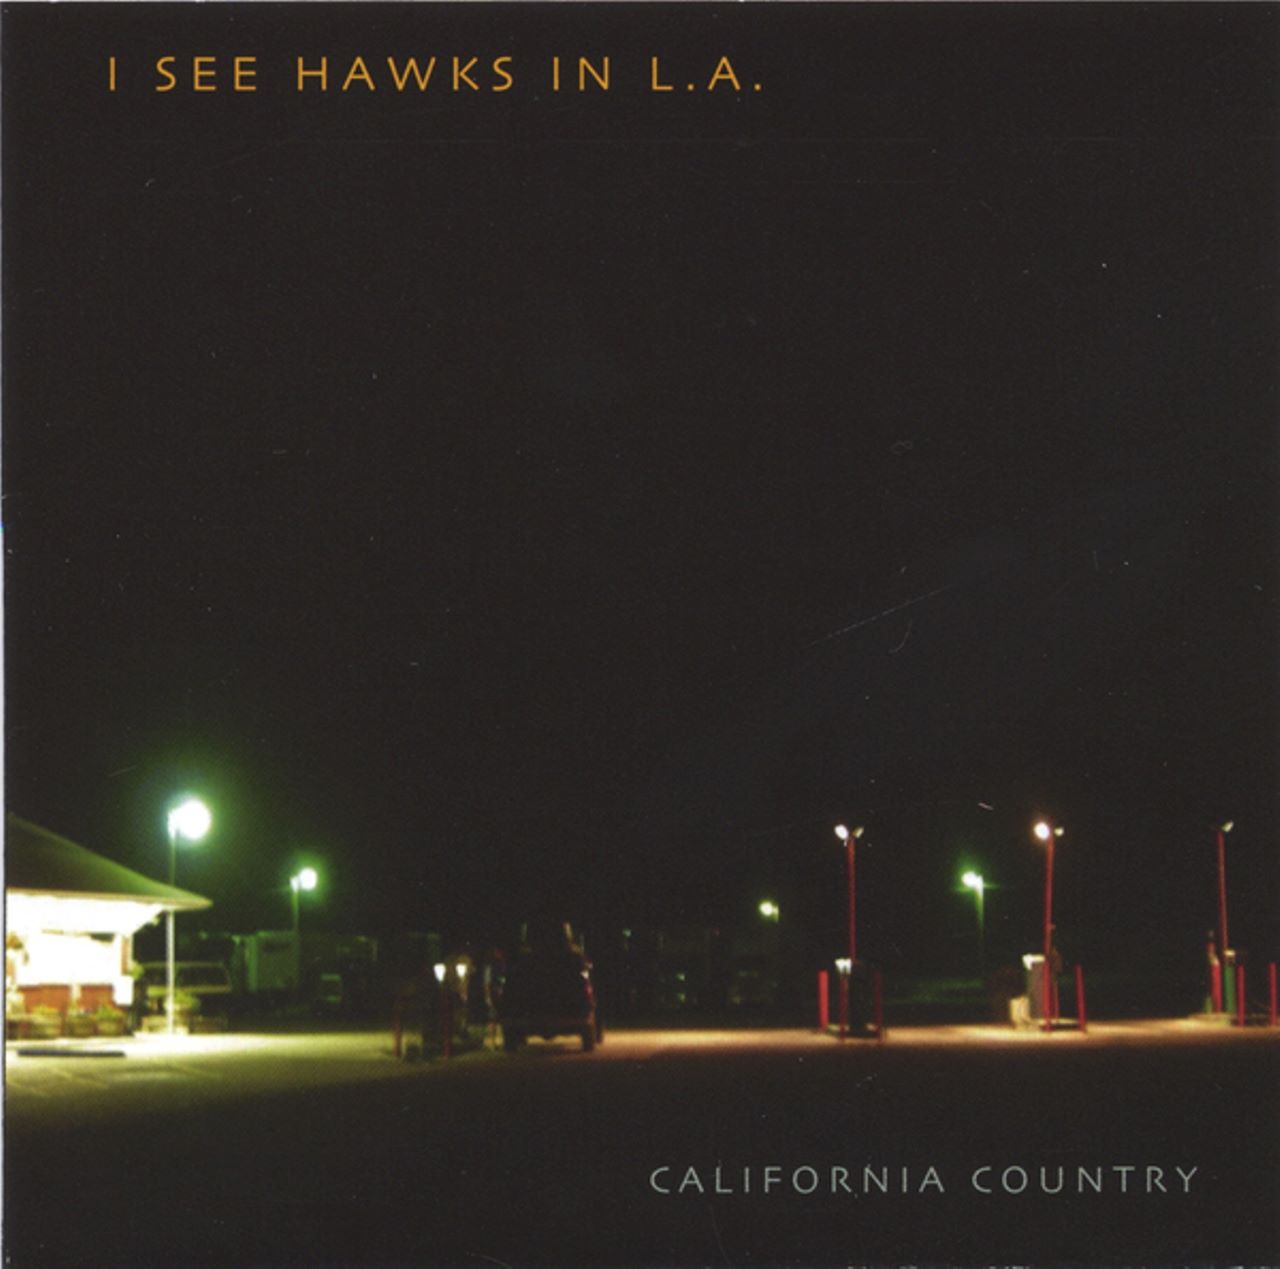 I See Hawks In L.A. - California Country cover album